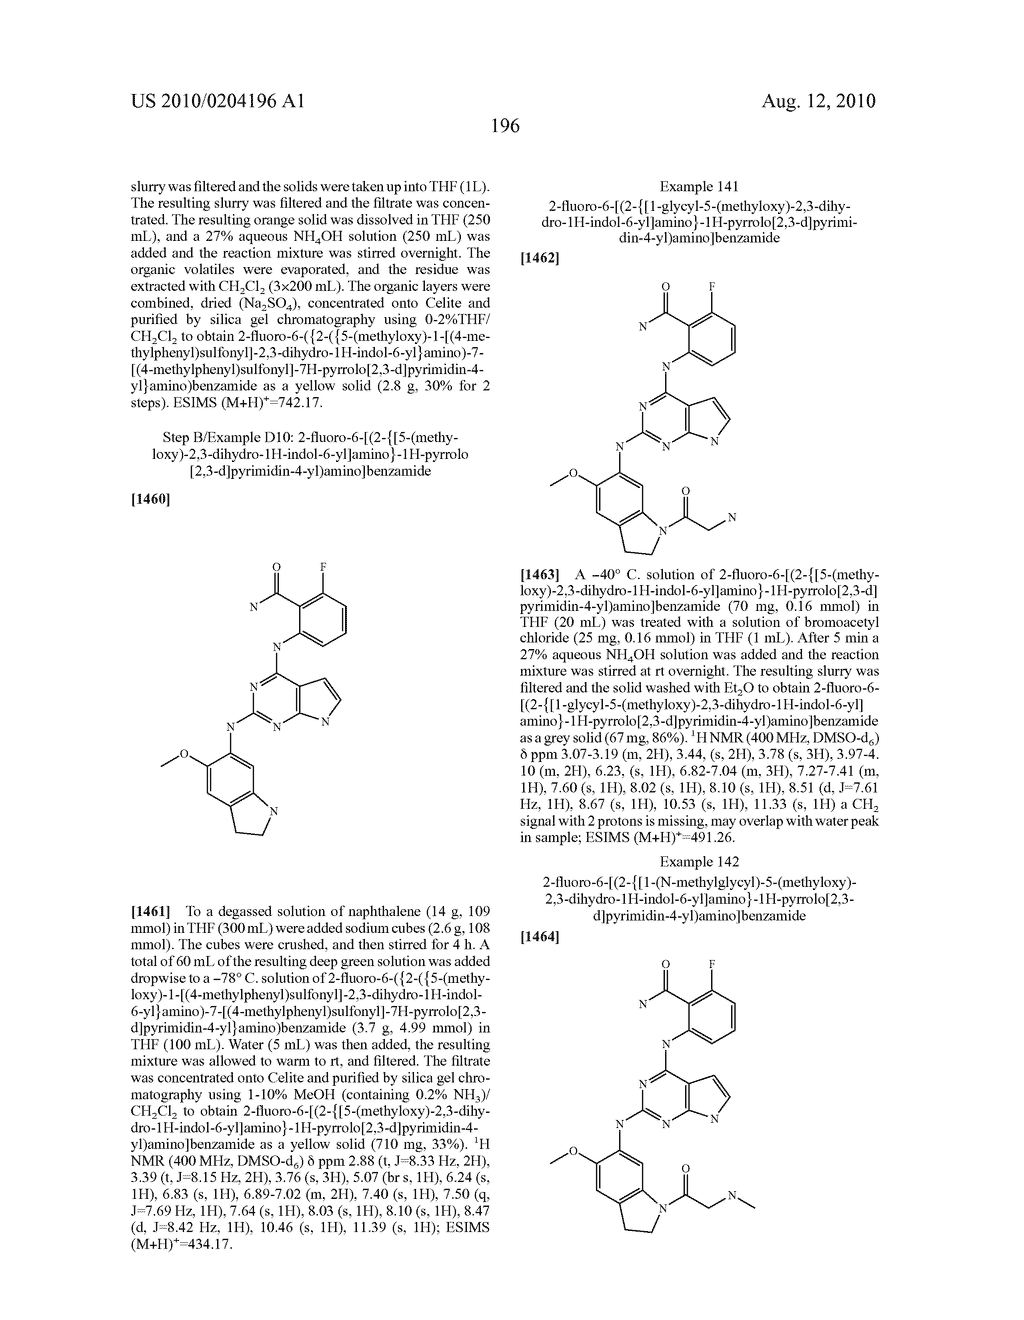 2-[2--1H-Pyrrolo[2,3-D]Pyrimidin-4-YL)Amino] Benzamide Derivatives As IGF-1R Inhibitors For The Treatment Of Cancer - diagram, schematic, and image 198